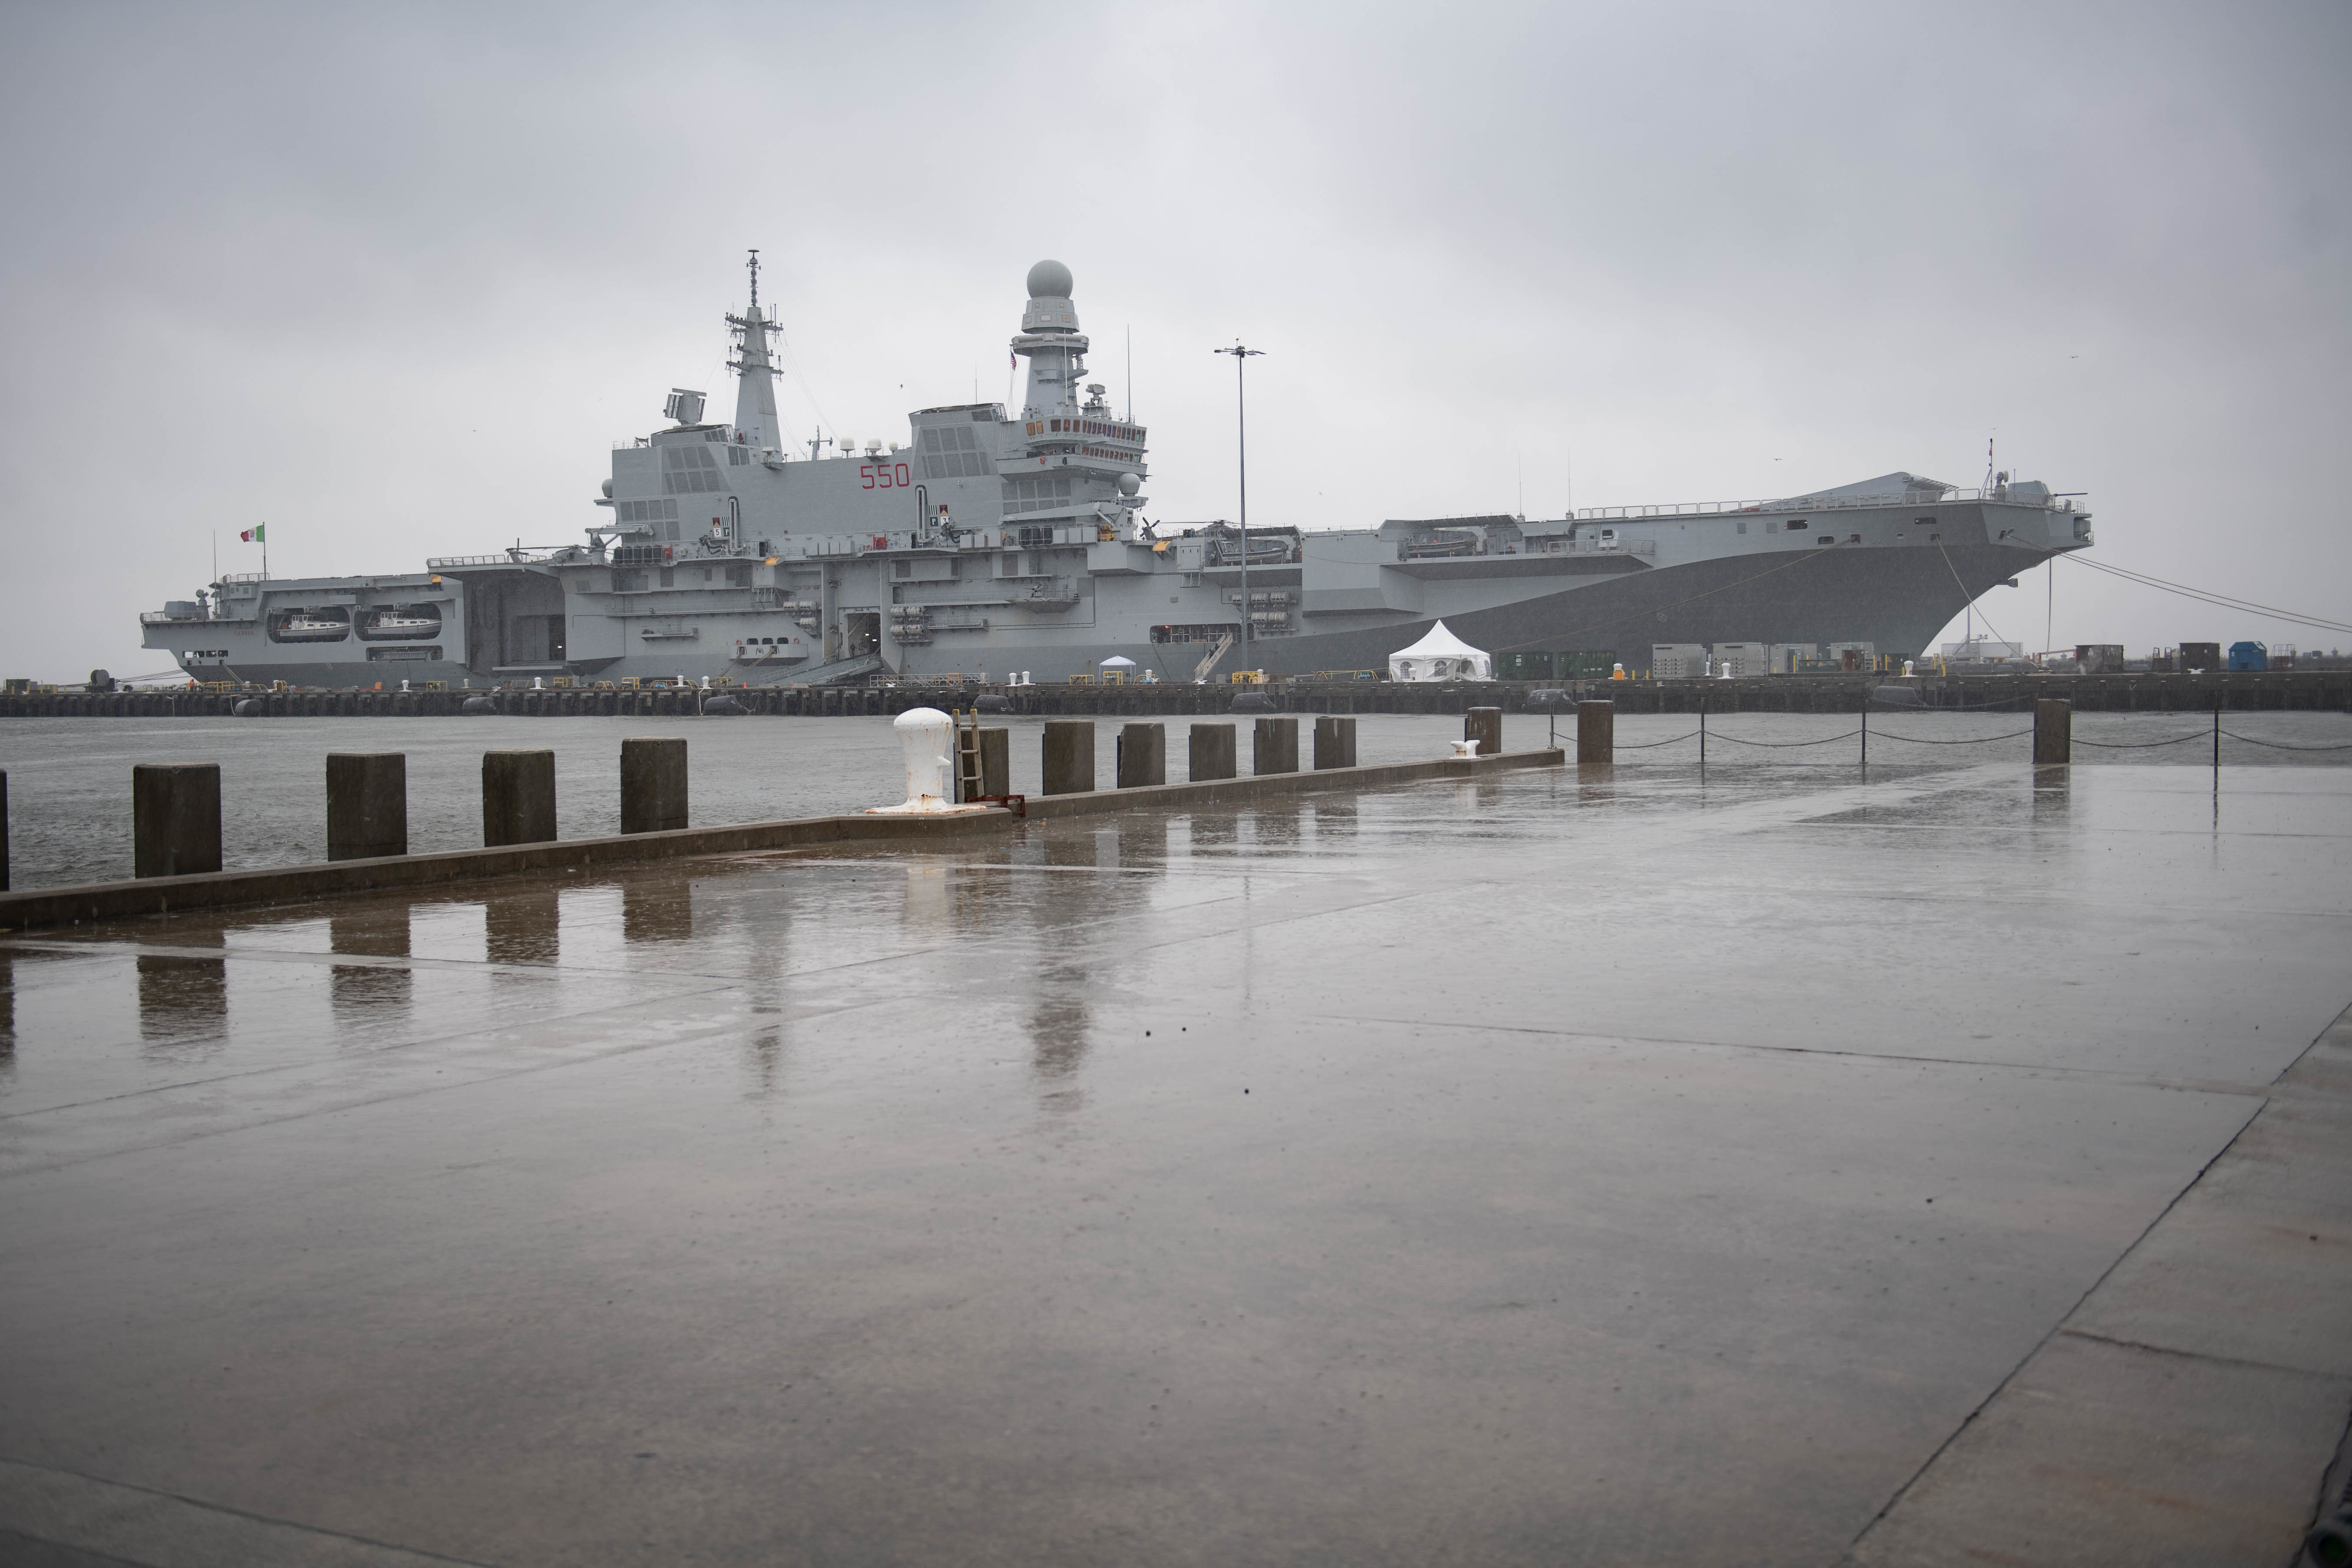 Italian Navy Aircraft Carrier ITS Cavour (CVH 550) Arrives at US Naval Station Norfolk